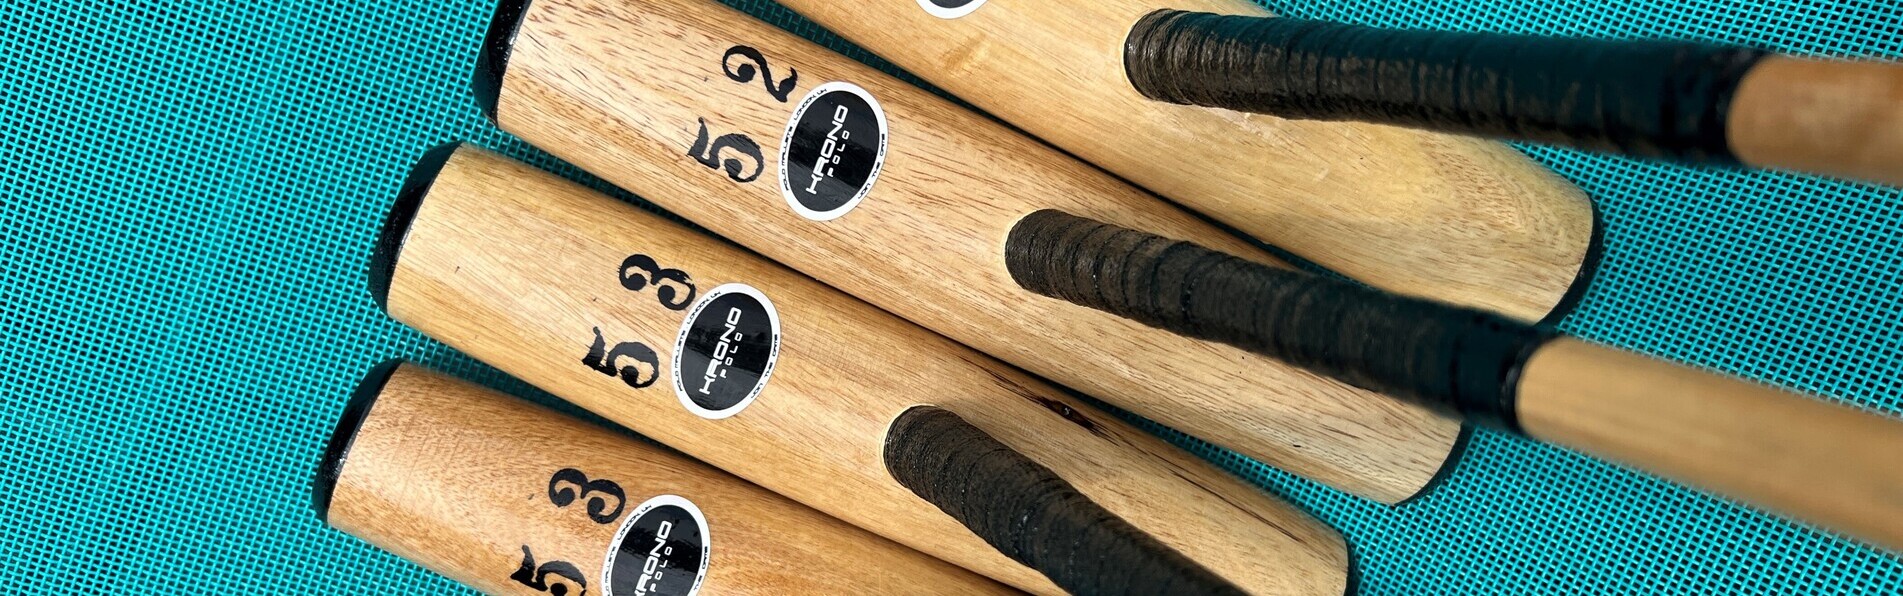 https://www.kronopolo.es/image/cache/catalog/Blog%20Banners/Mallets%20for%20Polo-1903x596.jpg